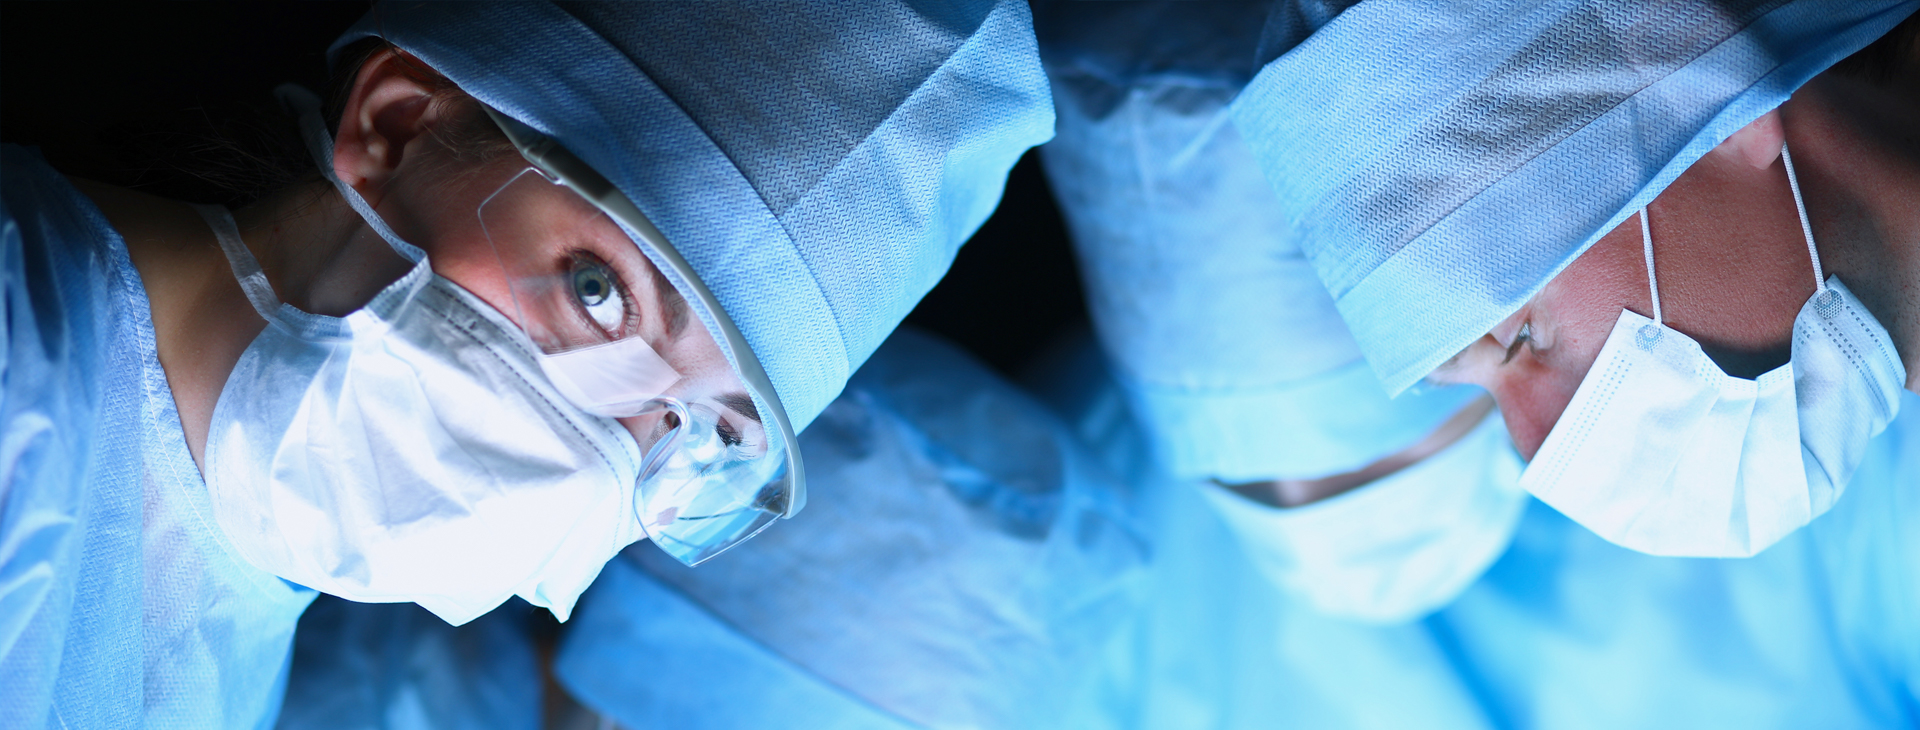 Competence in the operating theater